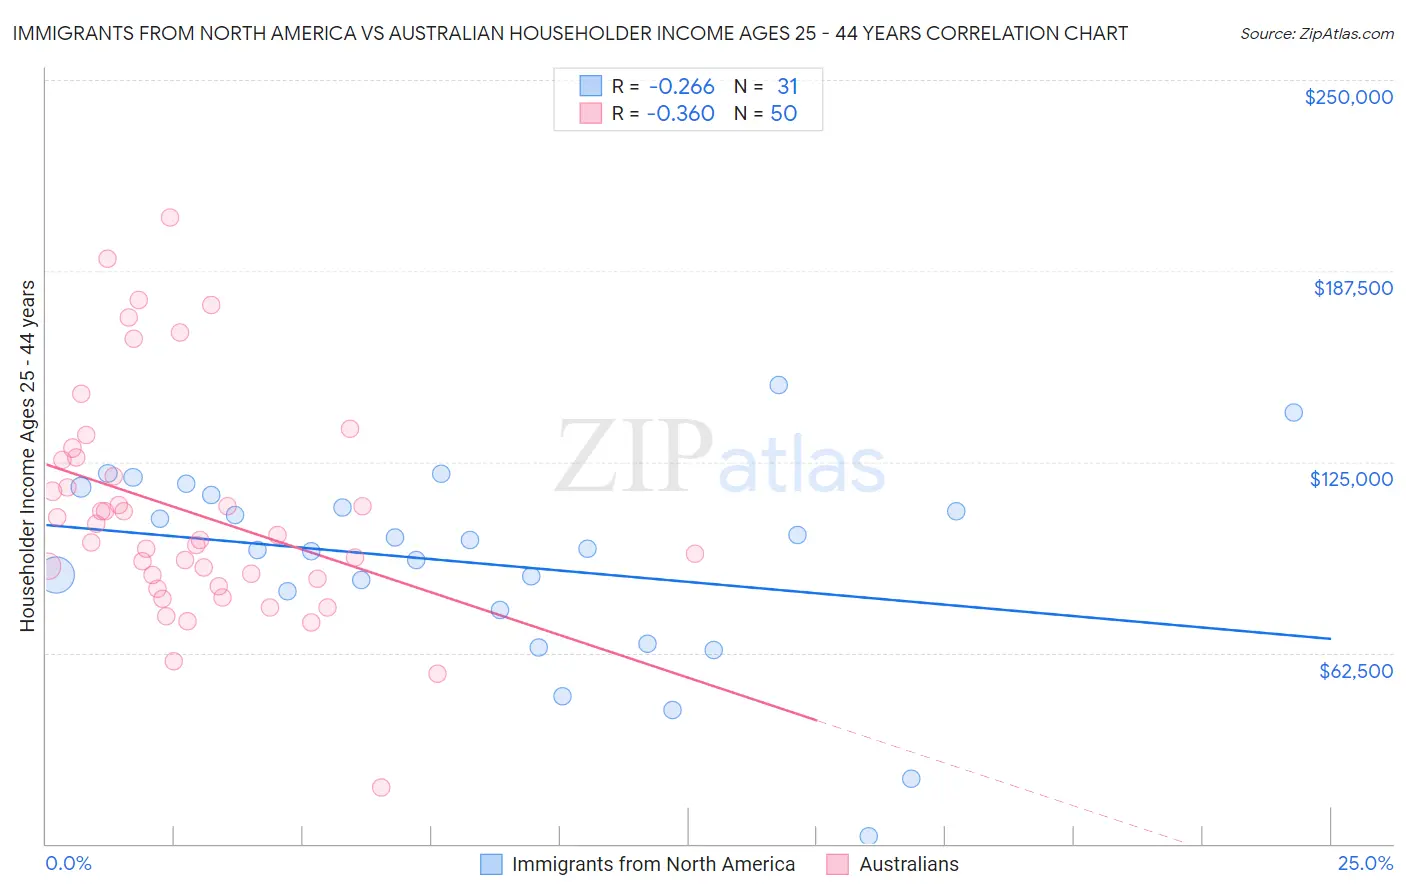 Immigrants from North America vs Australian Householder Income Ages 25 - 44 years